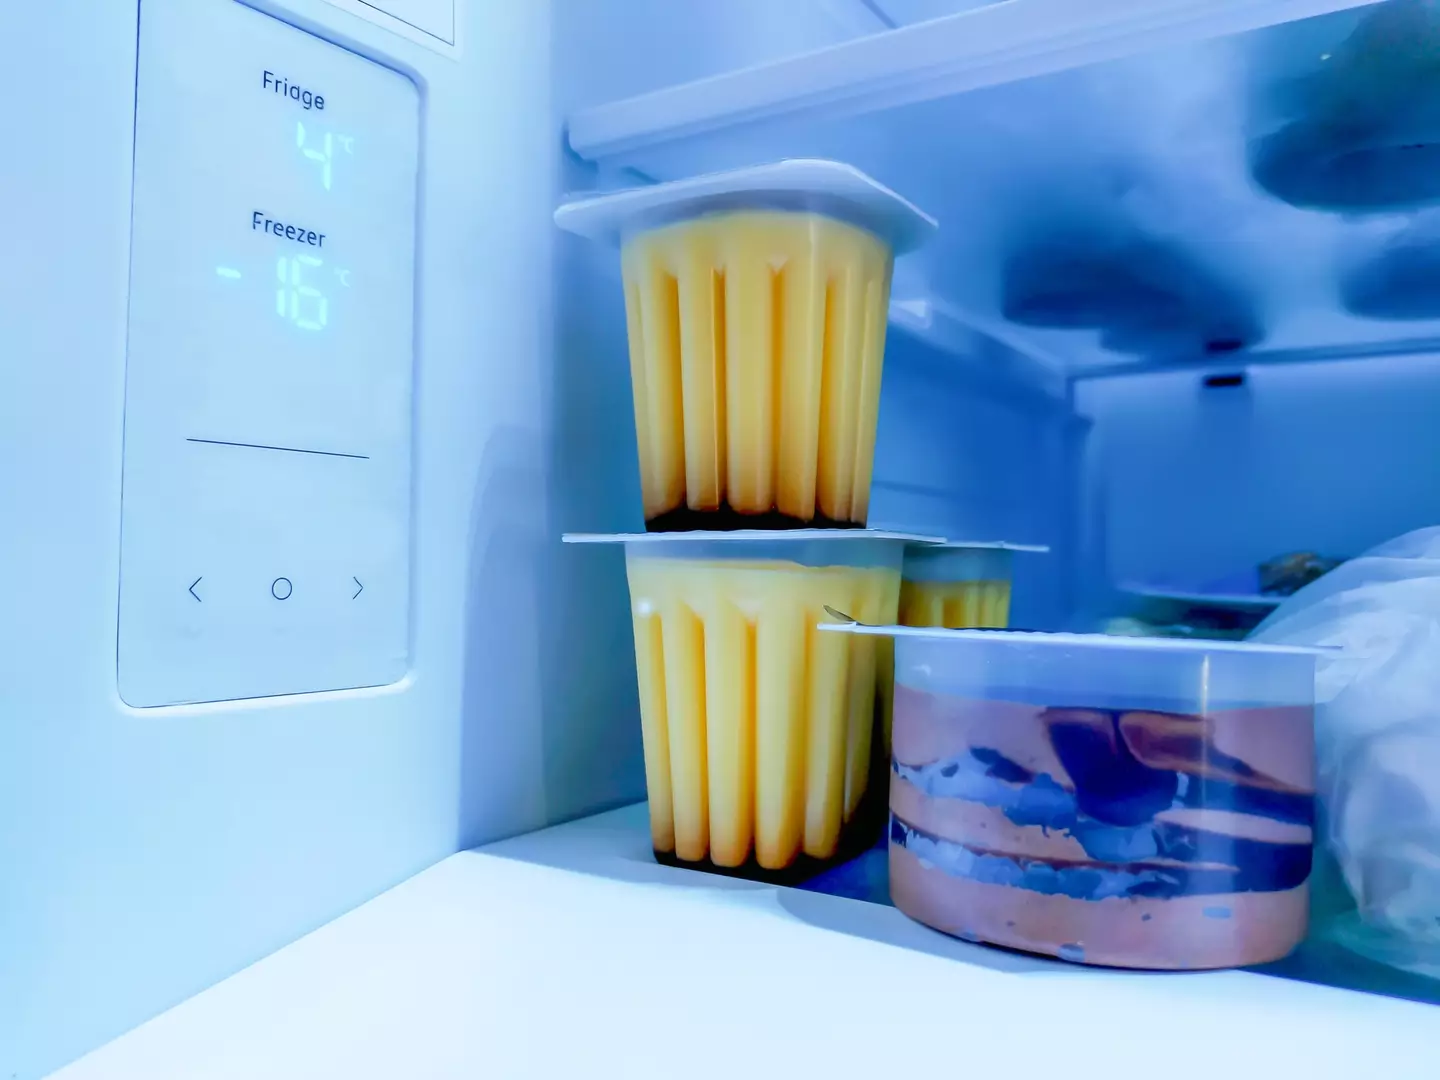 Fridges need to be set at a maximum of 5C to avoid food poisoning (japatino/Getty Stock Image)